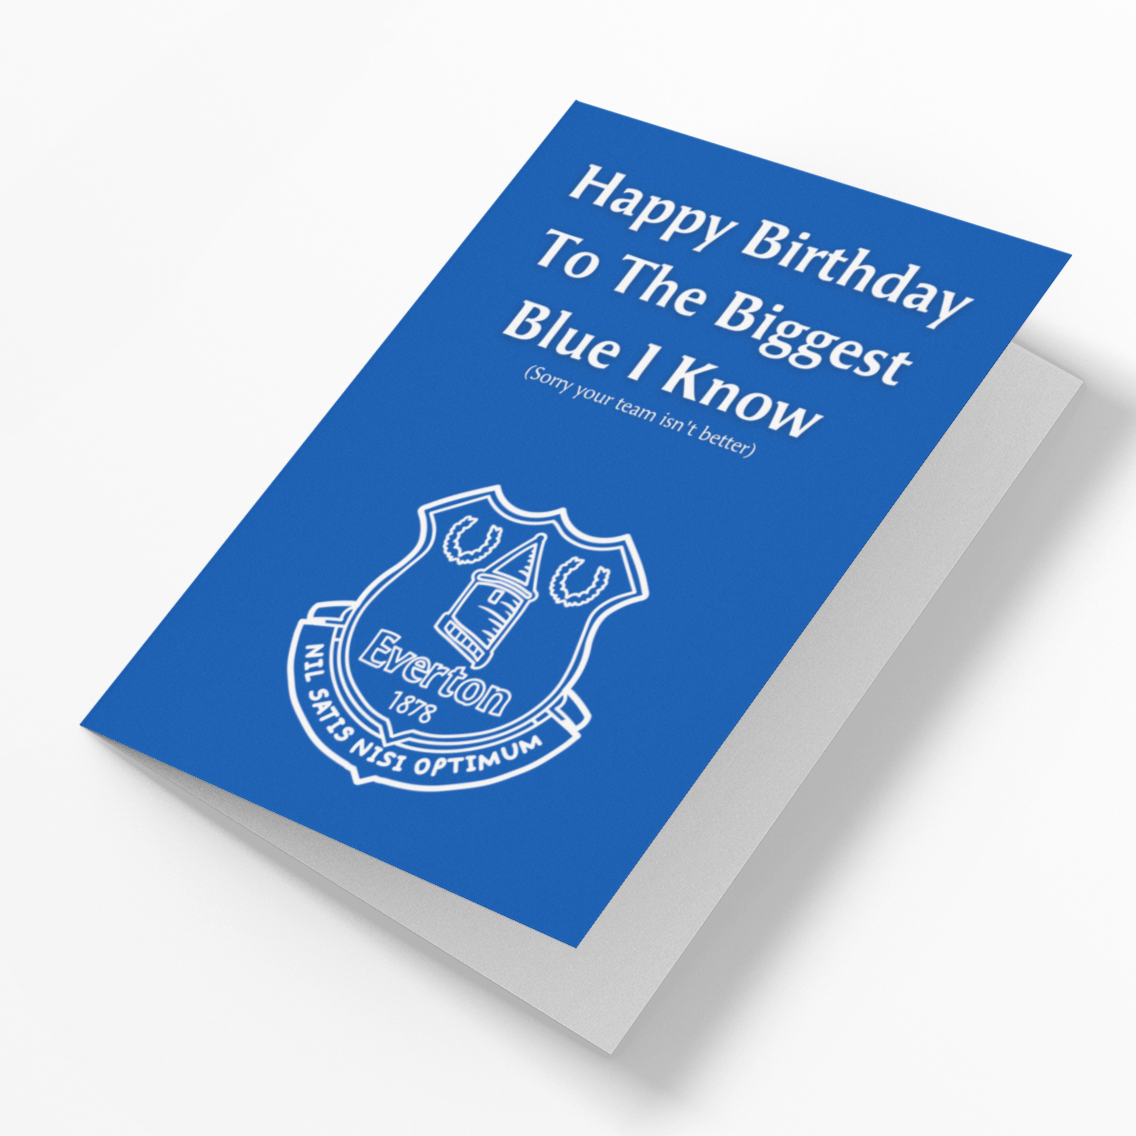 Load image into Gallery viewer, Biggest Blue Evertonian Birthday Card
